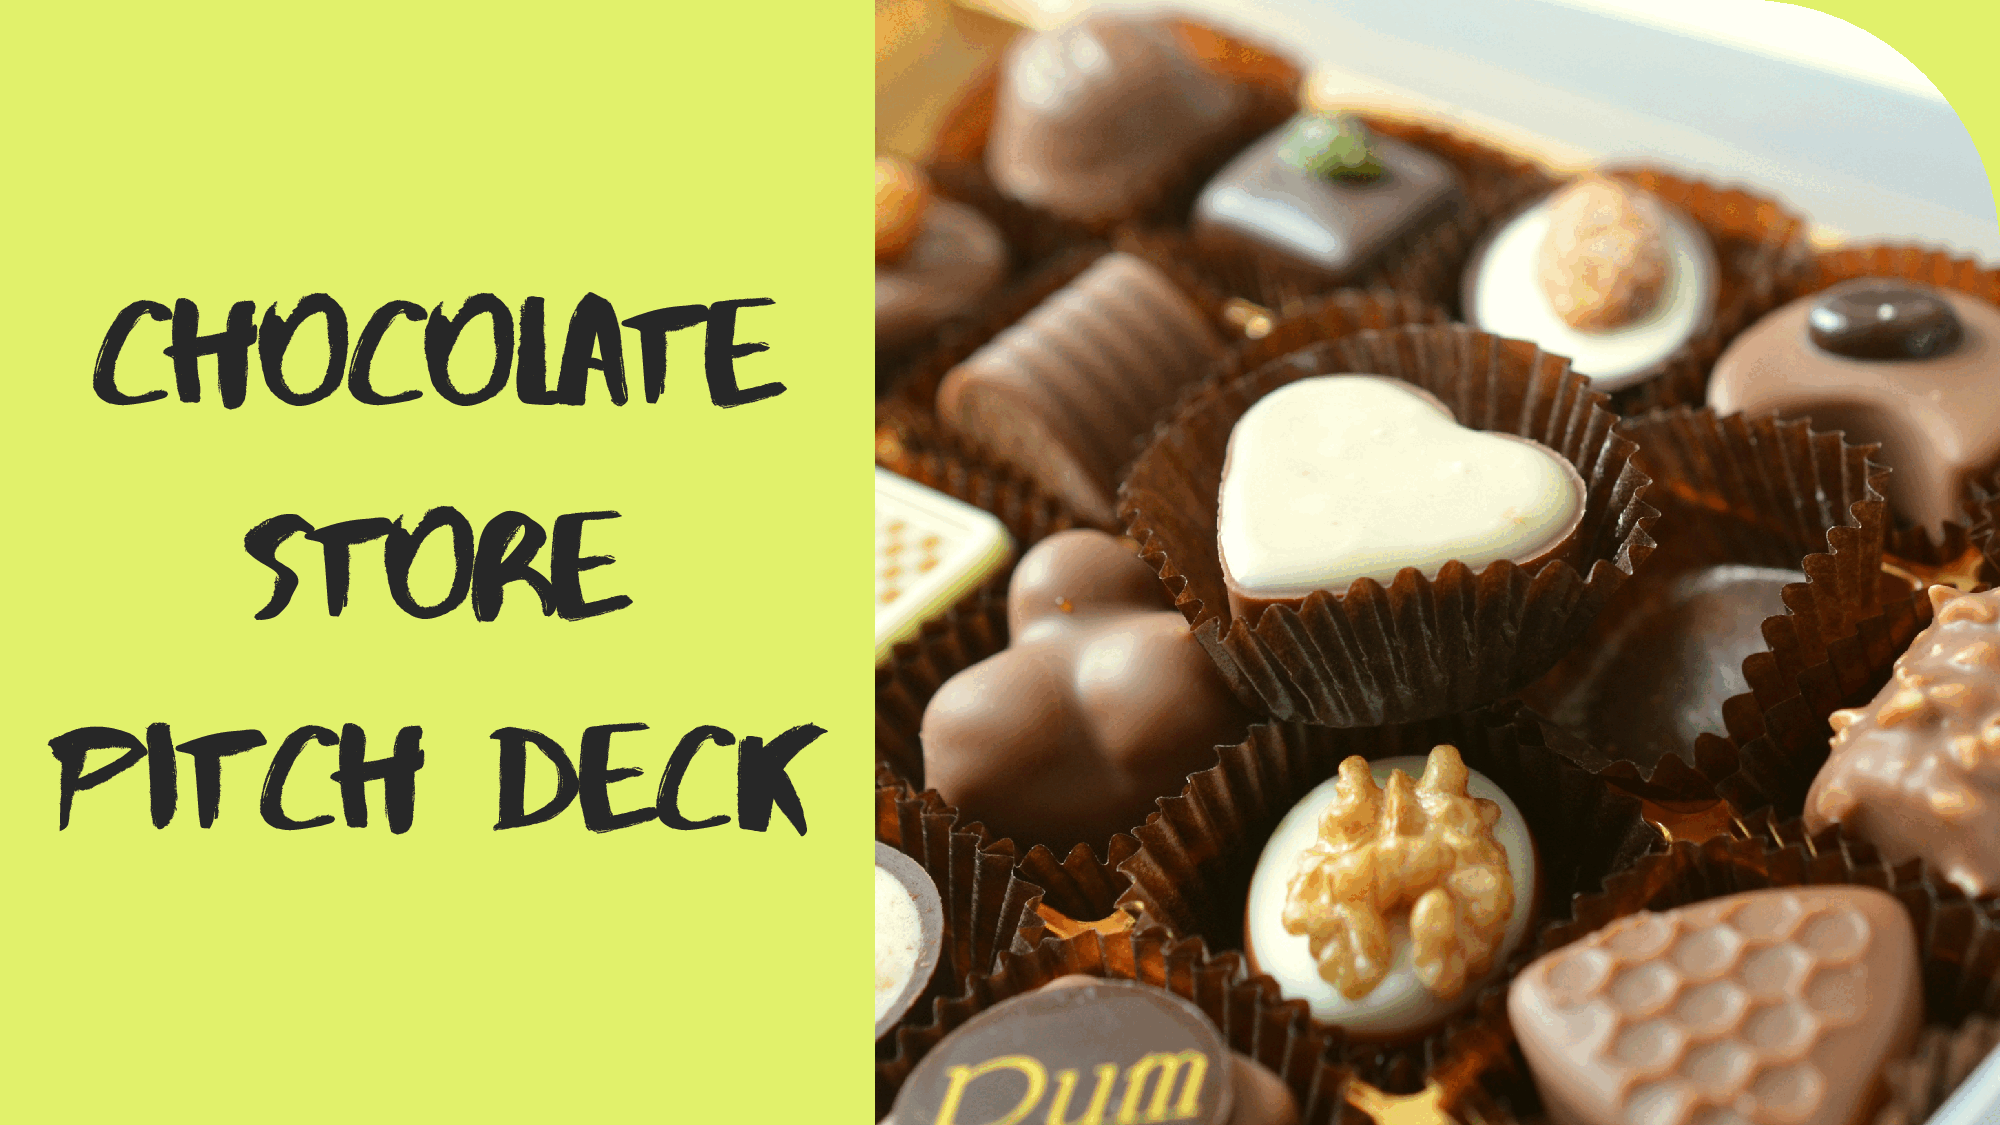 Chocolate Store Pitch Deck Template